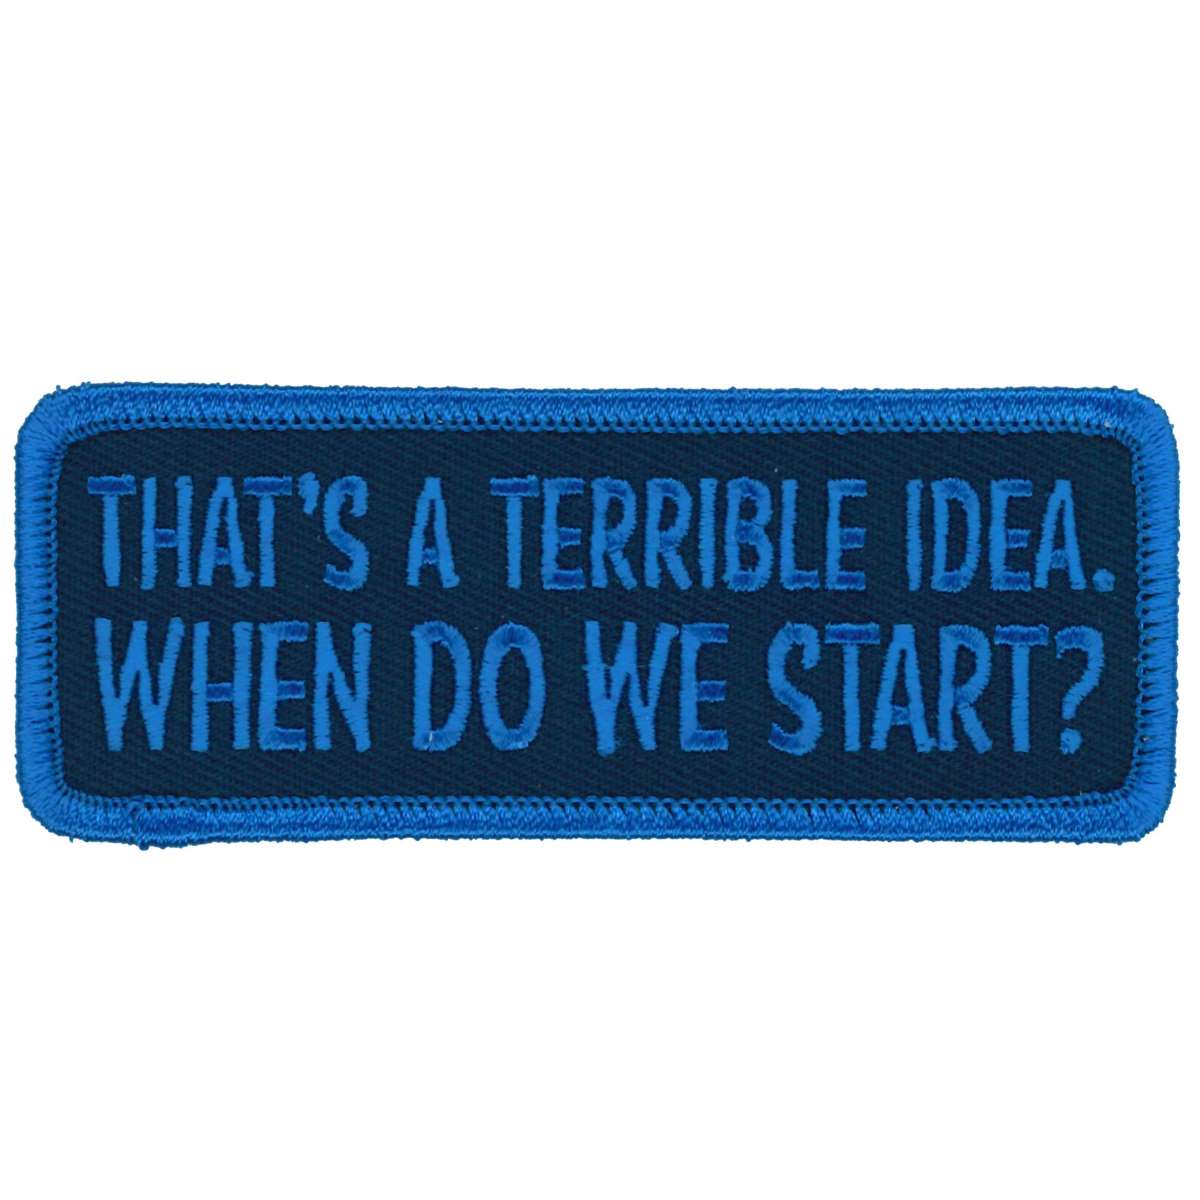 Hot Leathers Terrible Idea 4" X 2" Patch PPL9899